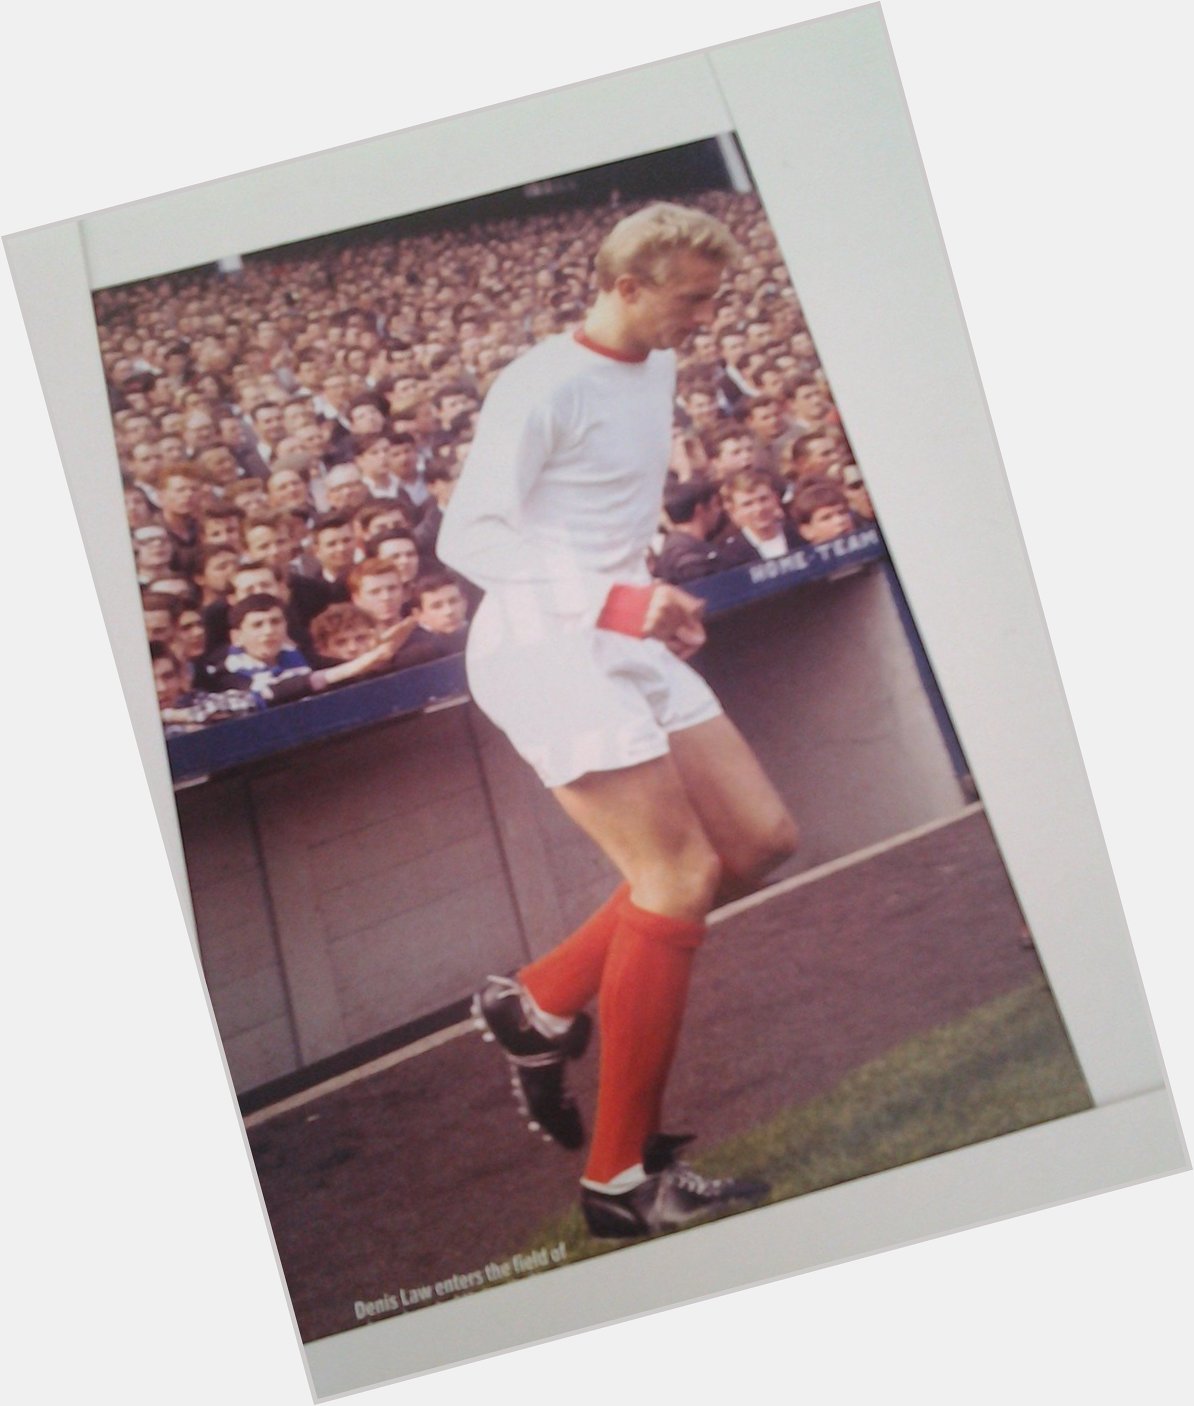 Denis , Denis Law 
King of the Football League 
Happy Birthday 